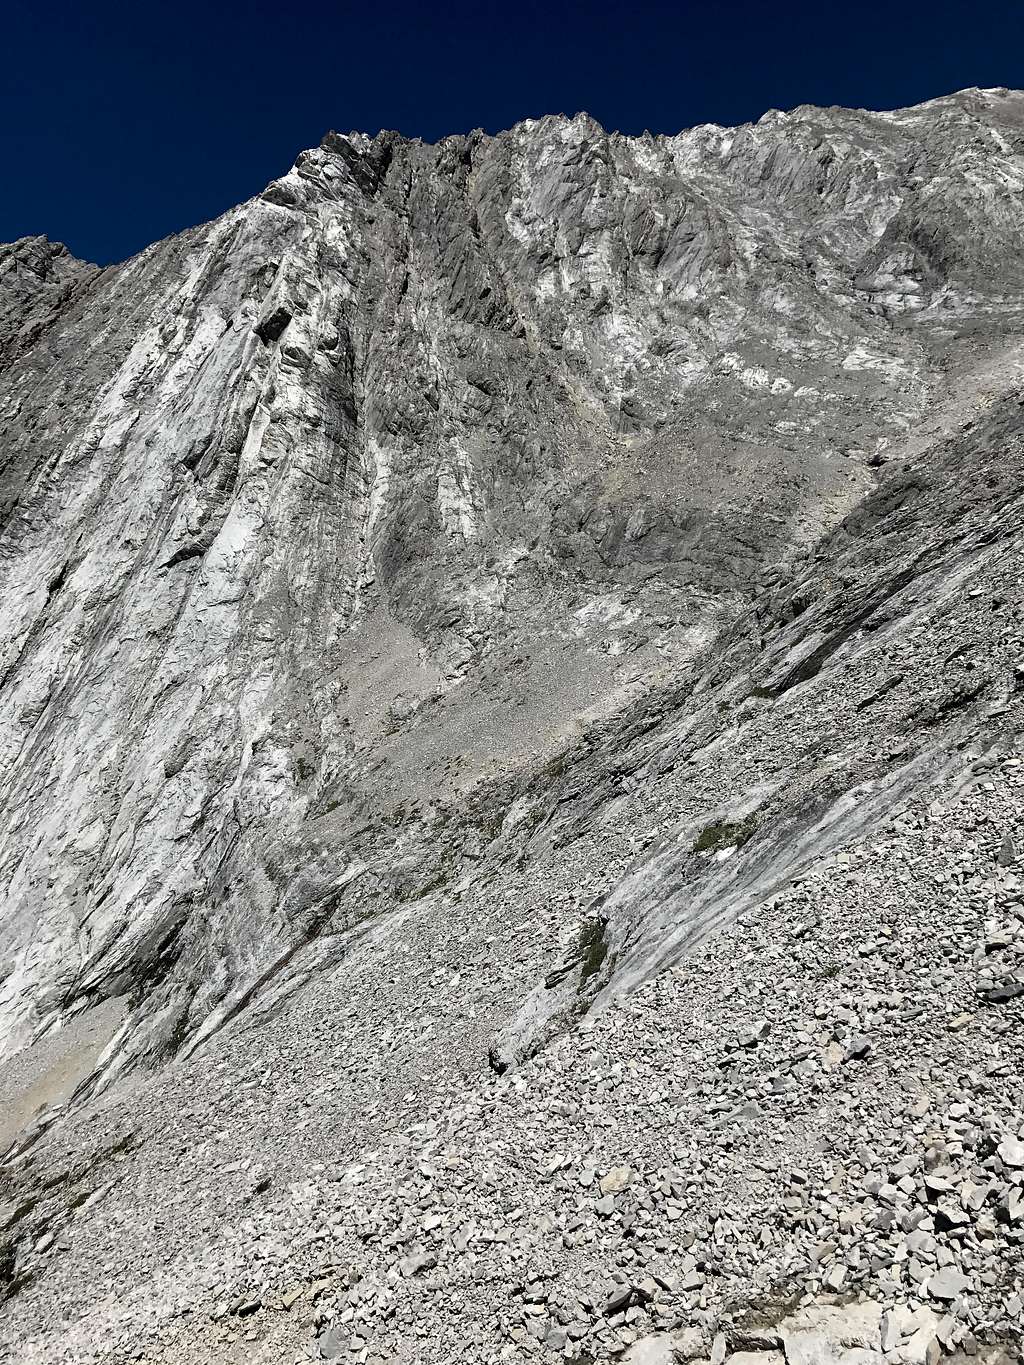 View to ascent gully